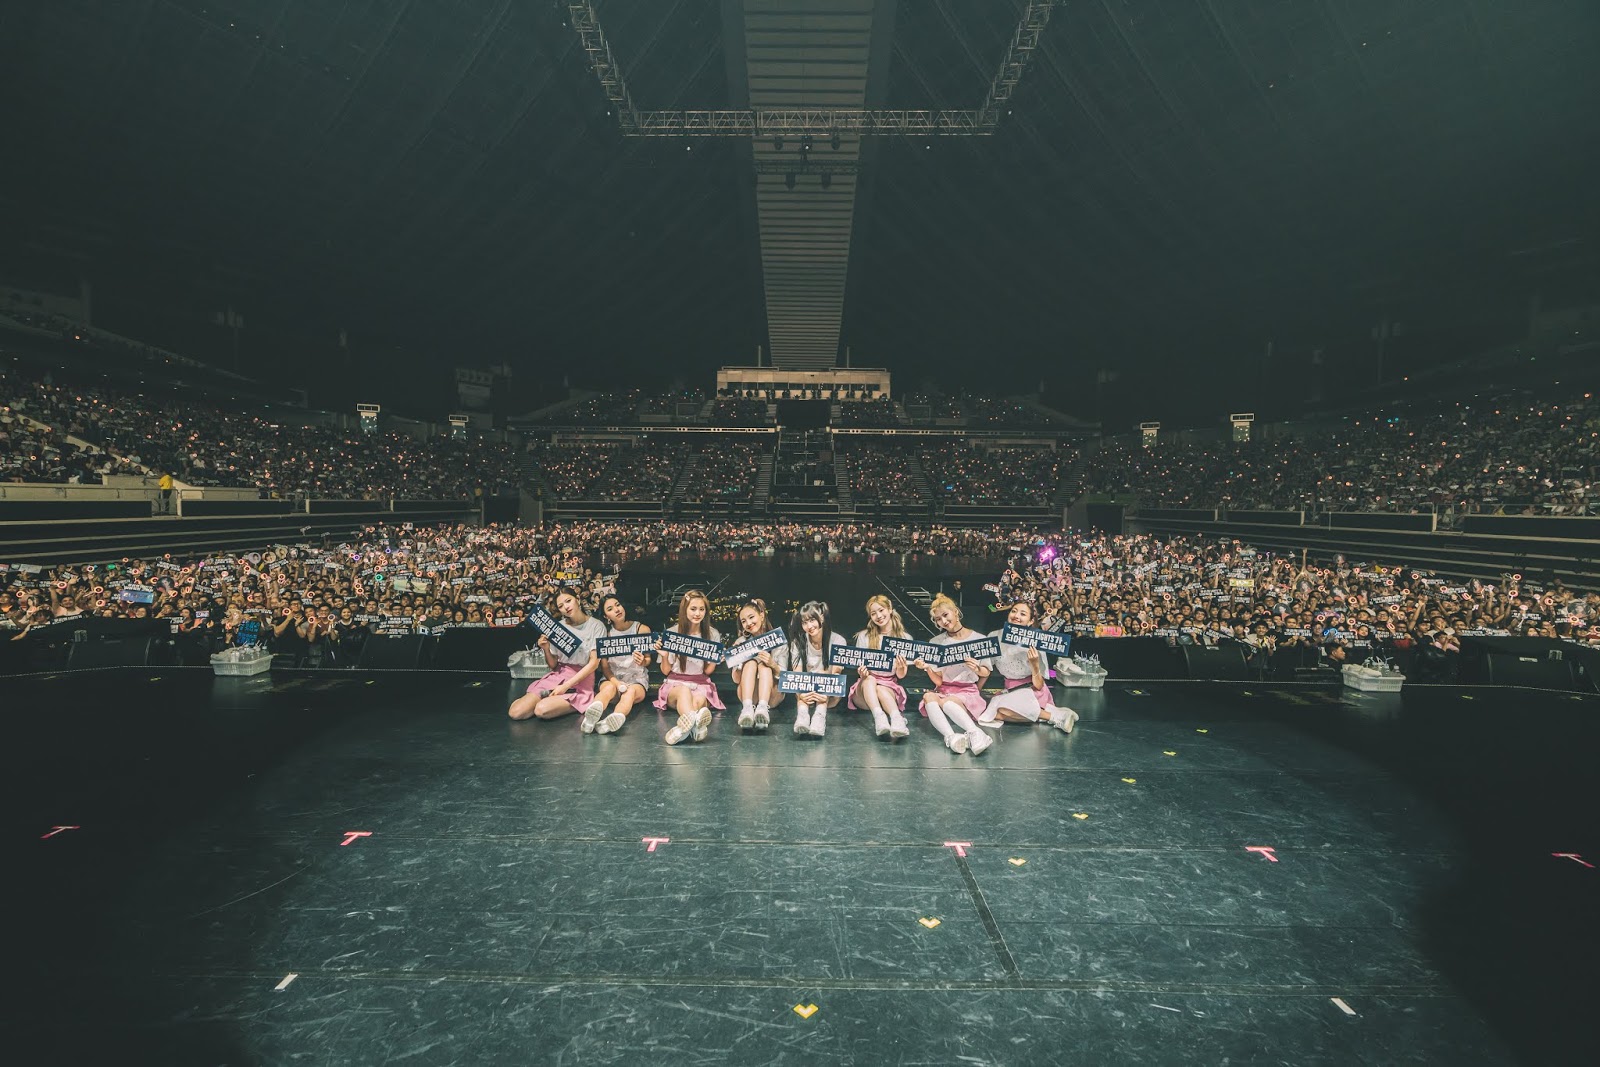 TWICE filled indoor stadium with a crowd of 10,000 ONCEs, "TWICE will